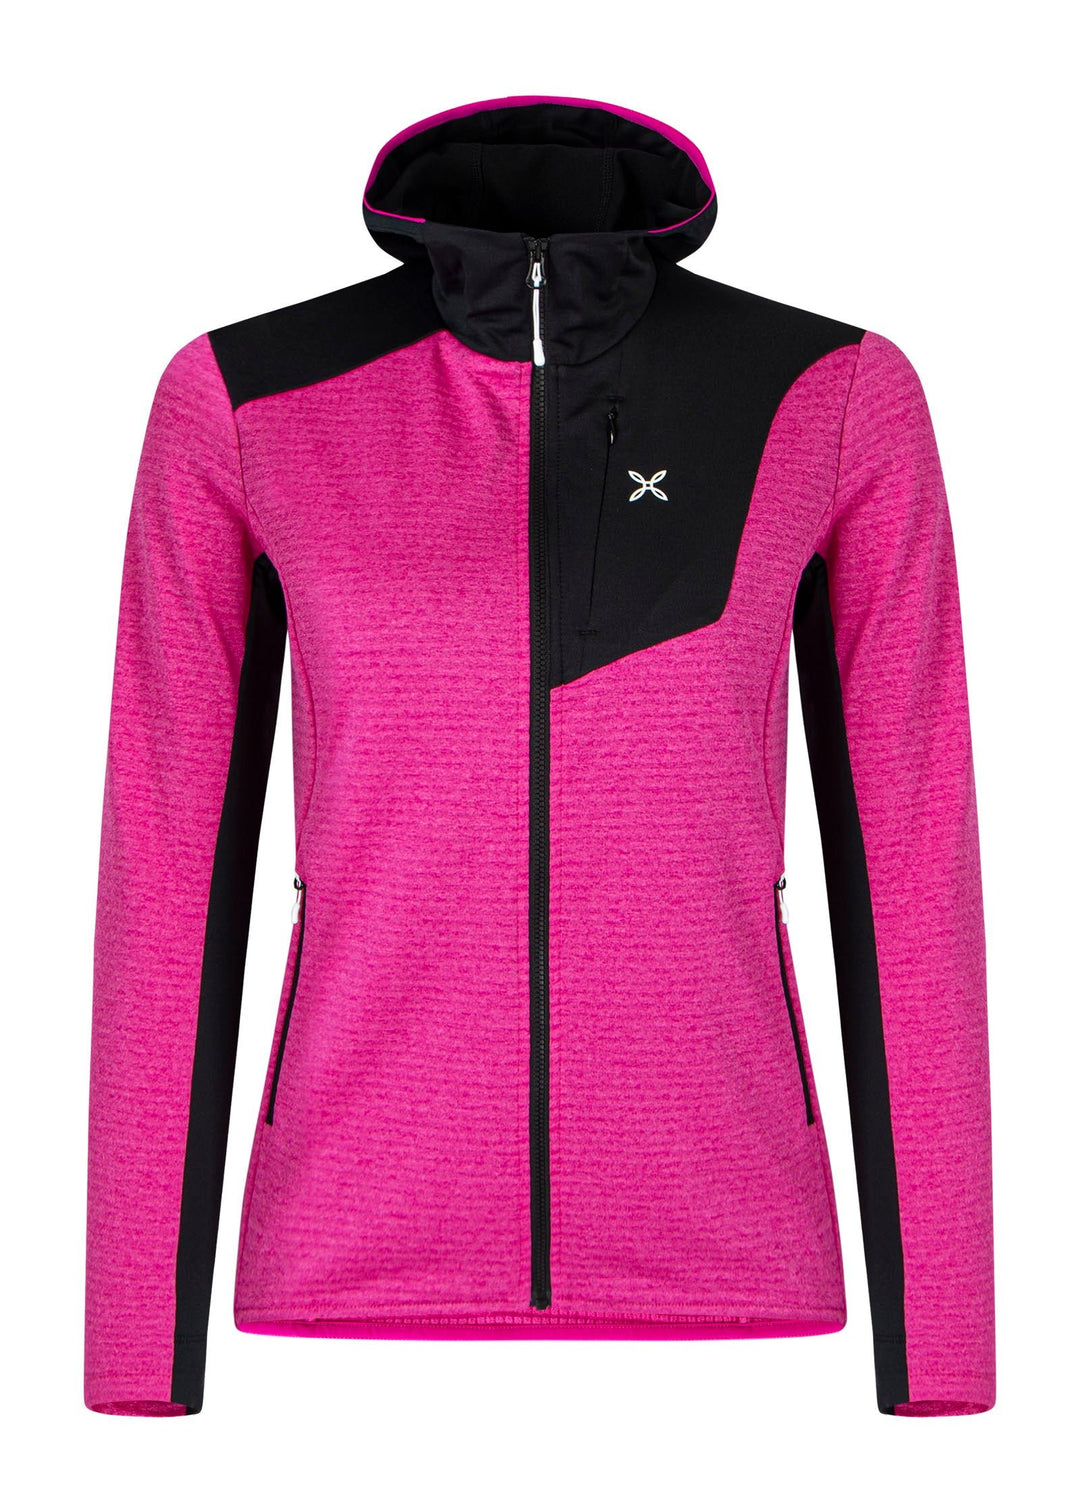 Thermalgrid Pro Hoody Maglia W - Intense Violet (7) - Blogside